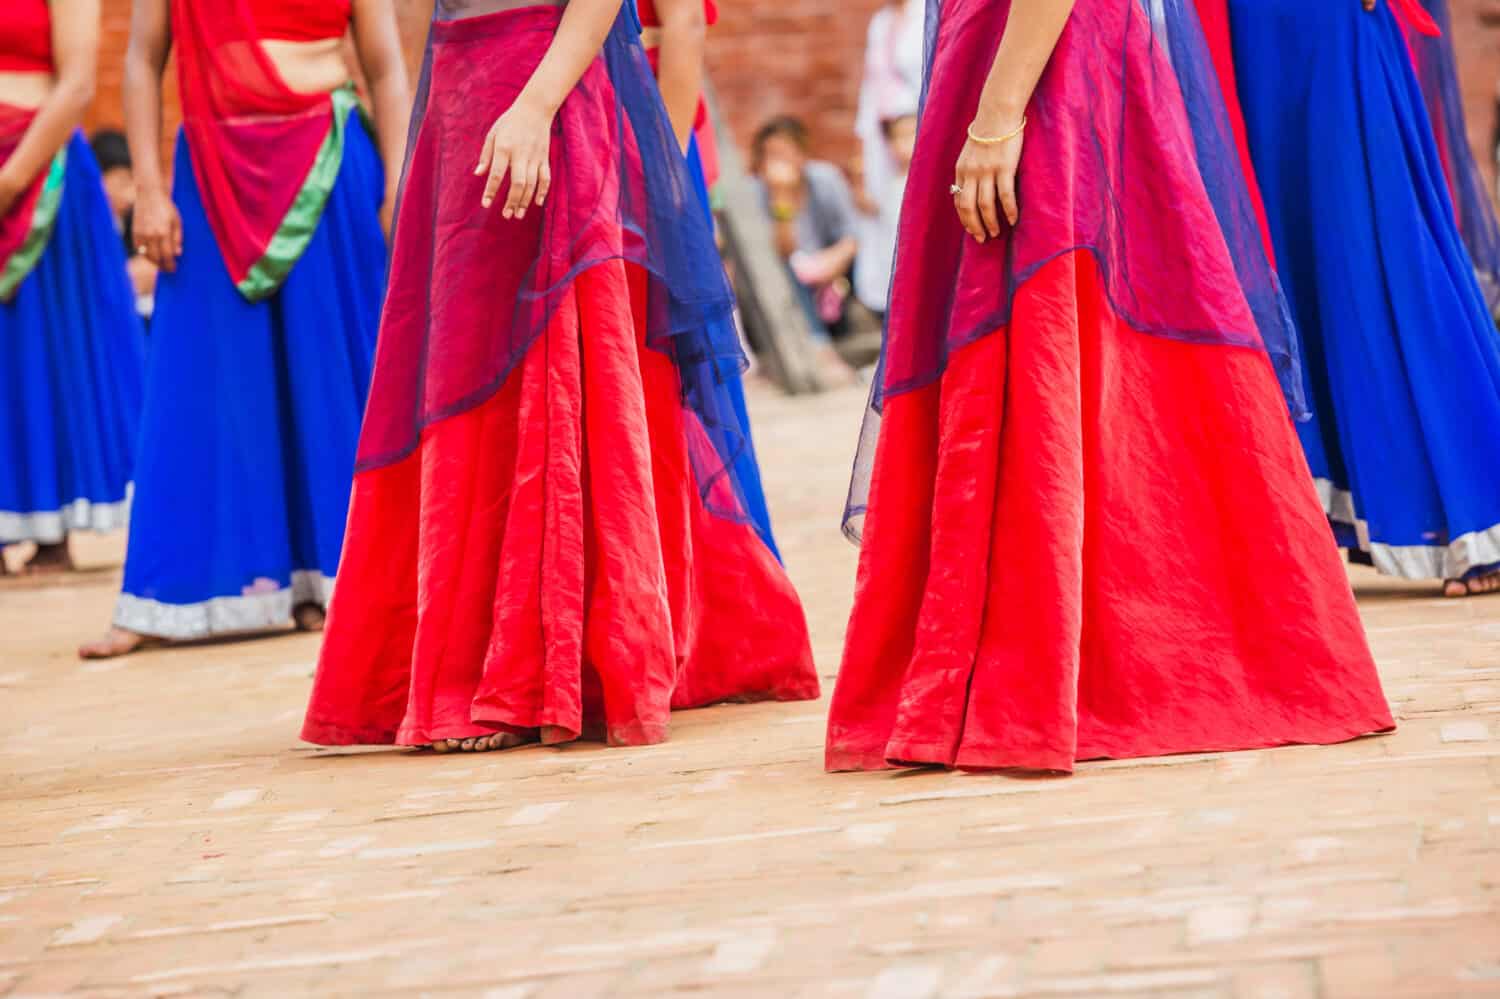 Bollywood Dancers with colorful dress in a row,Ready to dance position,Asian Dancers,Dance Concept.